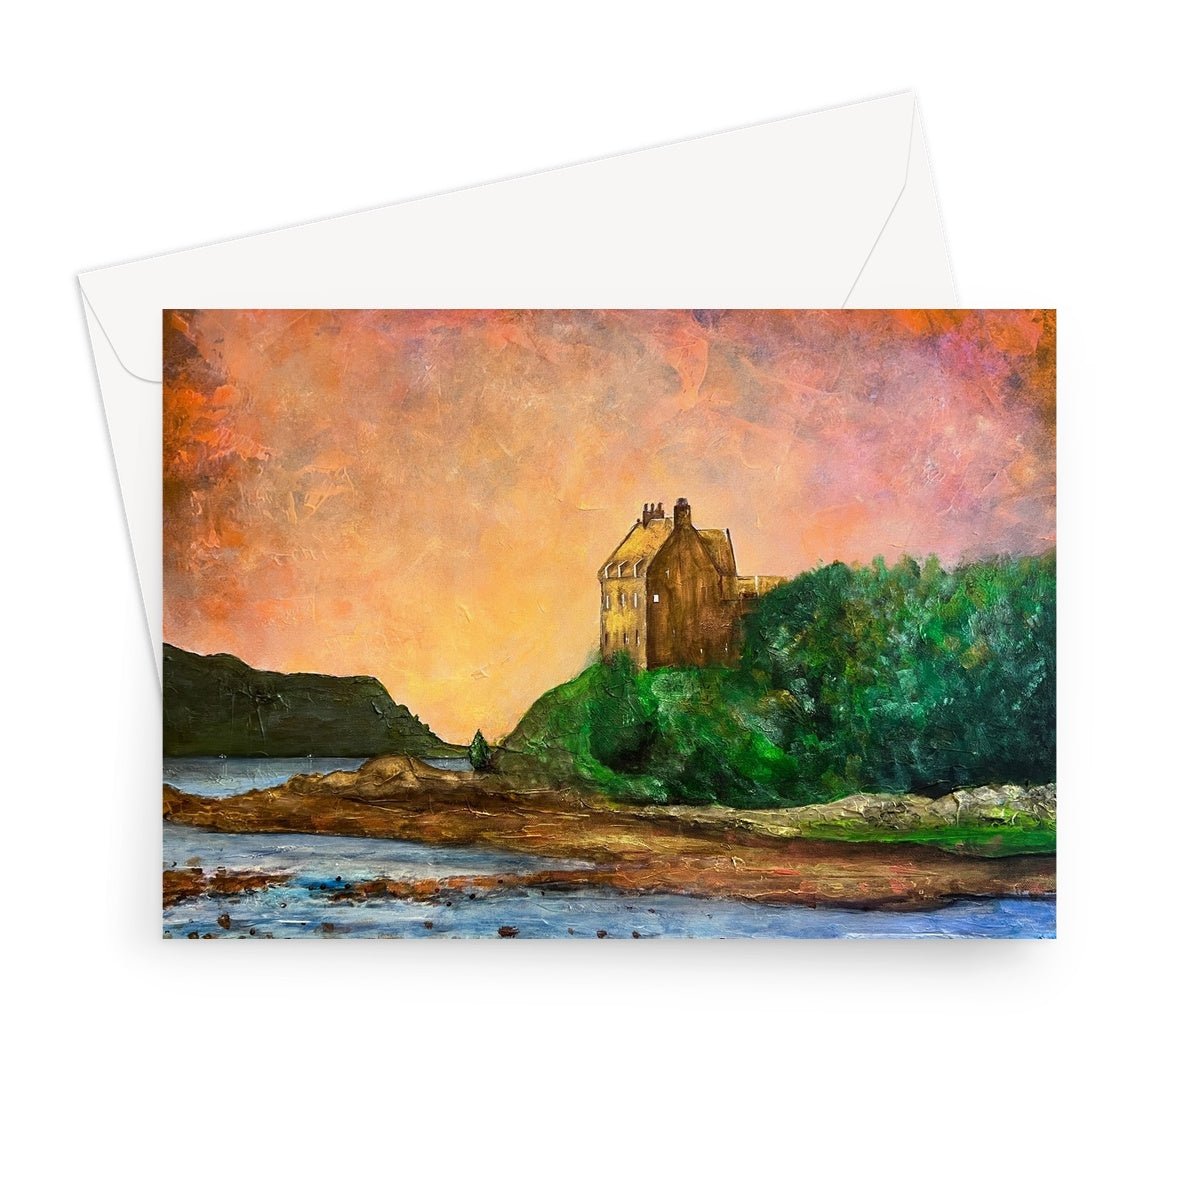 Duntrune Castle Art Gifts Greeting Card-Greetings Cards-Historic & Iconic Scotland Art Gallery-7"x5"-10 Cards-Paintings, Prints, Homeware, Art Gifts From Scotland By Scottish Artist Kevin Hunter